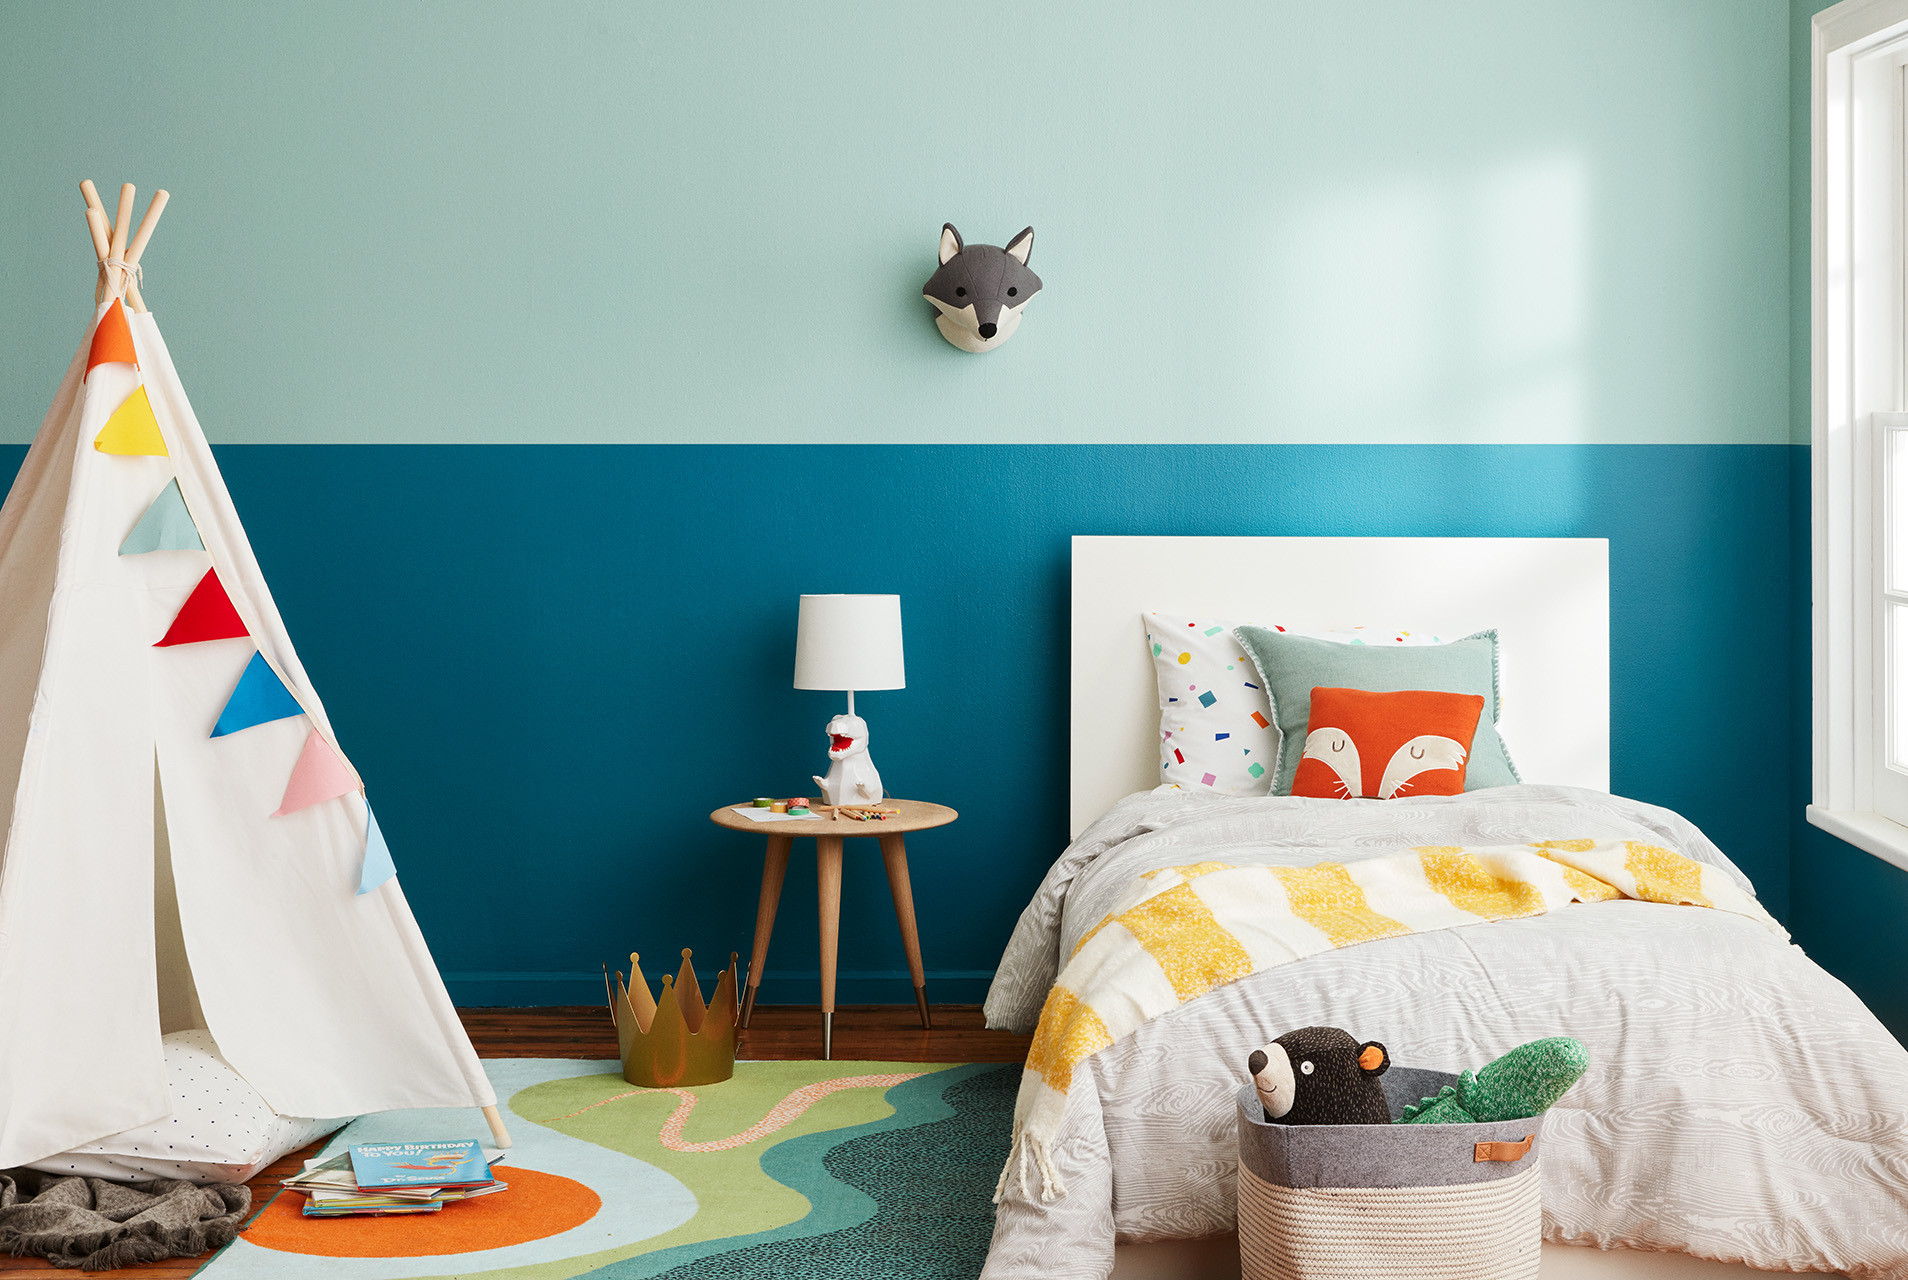 Kids Rooms Paint Color Ideas
 How to Choose a Youthful Paint Color for Your Child s Room